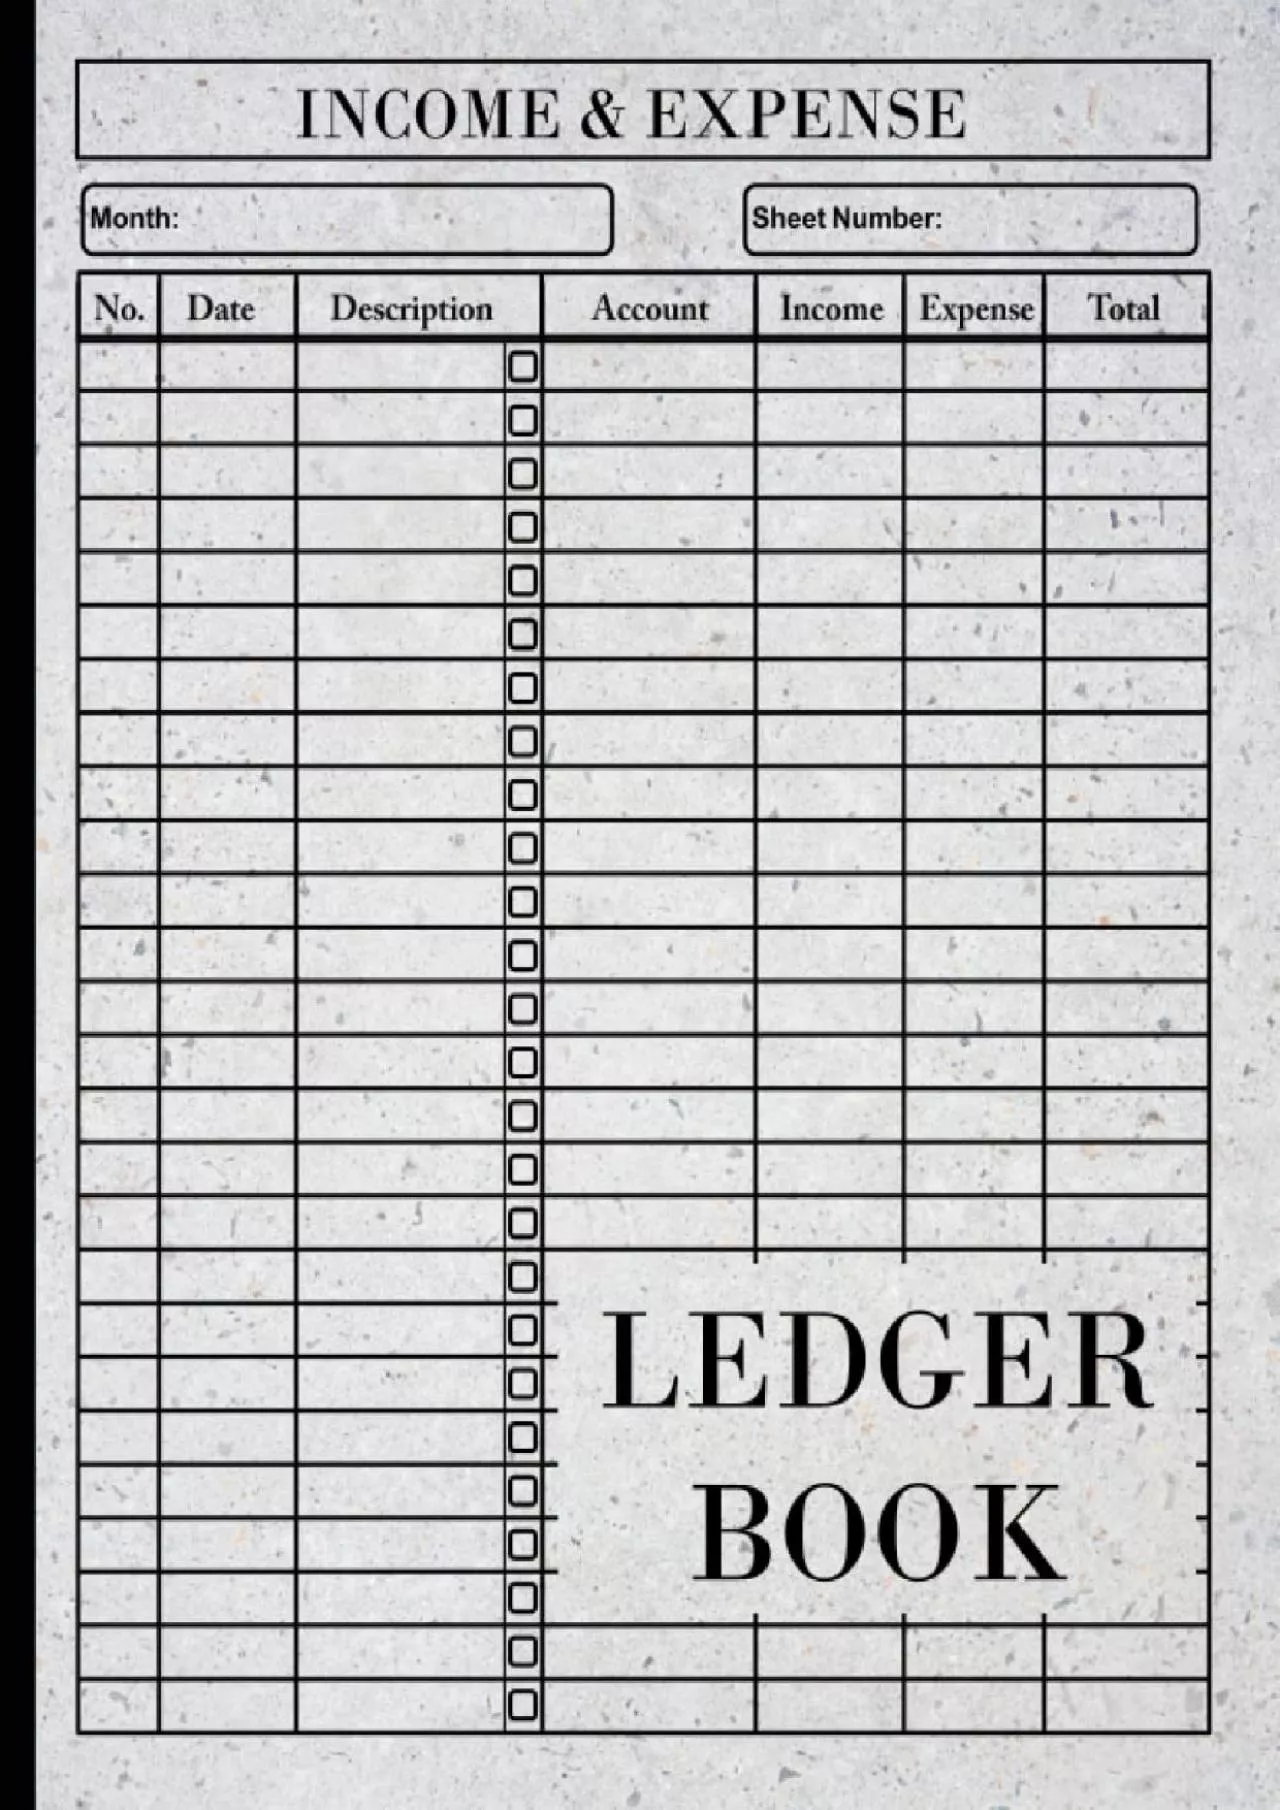 [BEST]-Ledger Book: Record Income and Expense / Income and Expense Log Book For Small